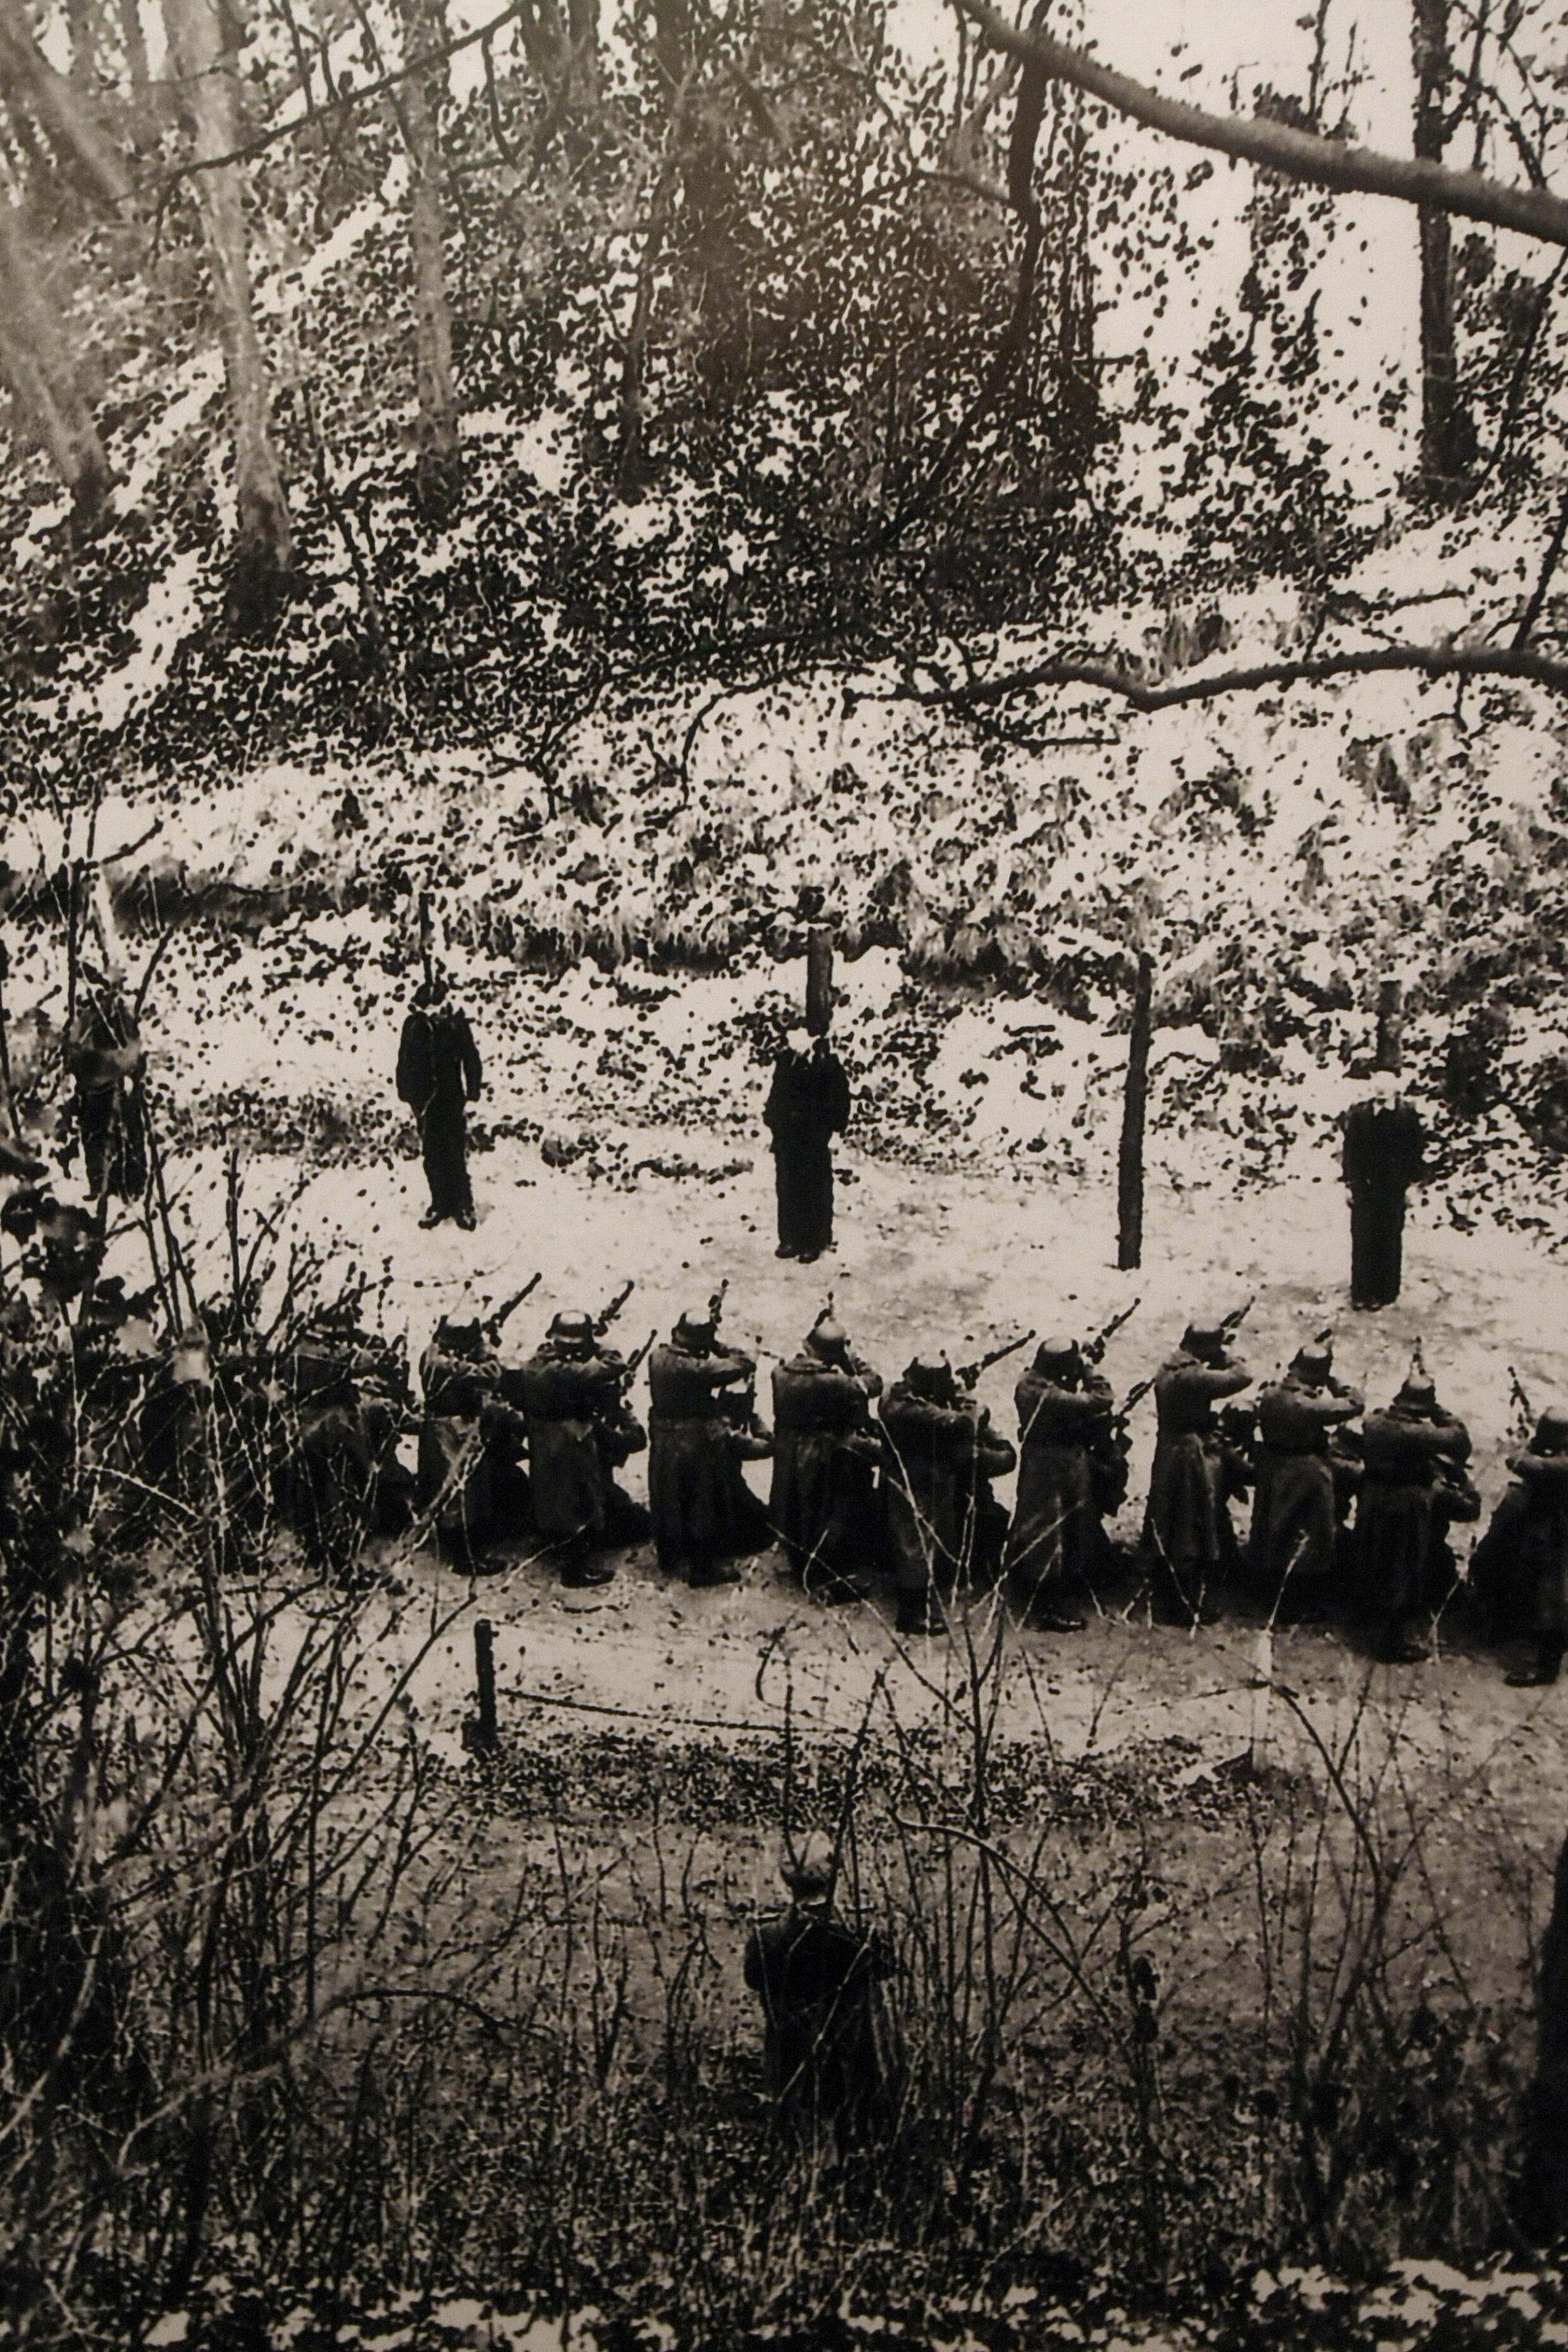 French resistance members being executed at the Mont Valerien military camp by German soldiers on February 21, 1944.